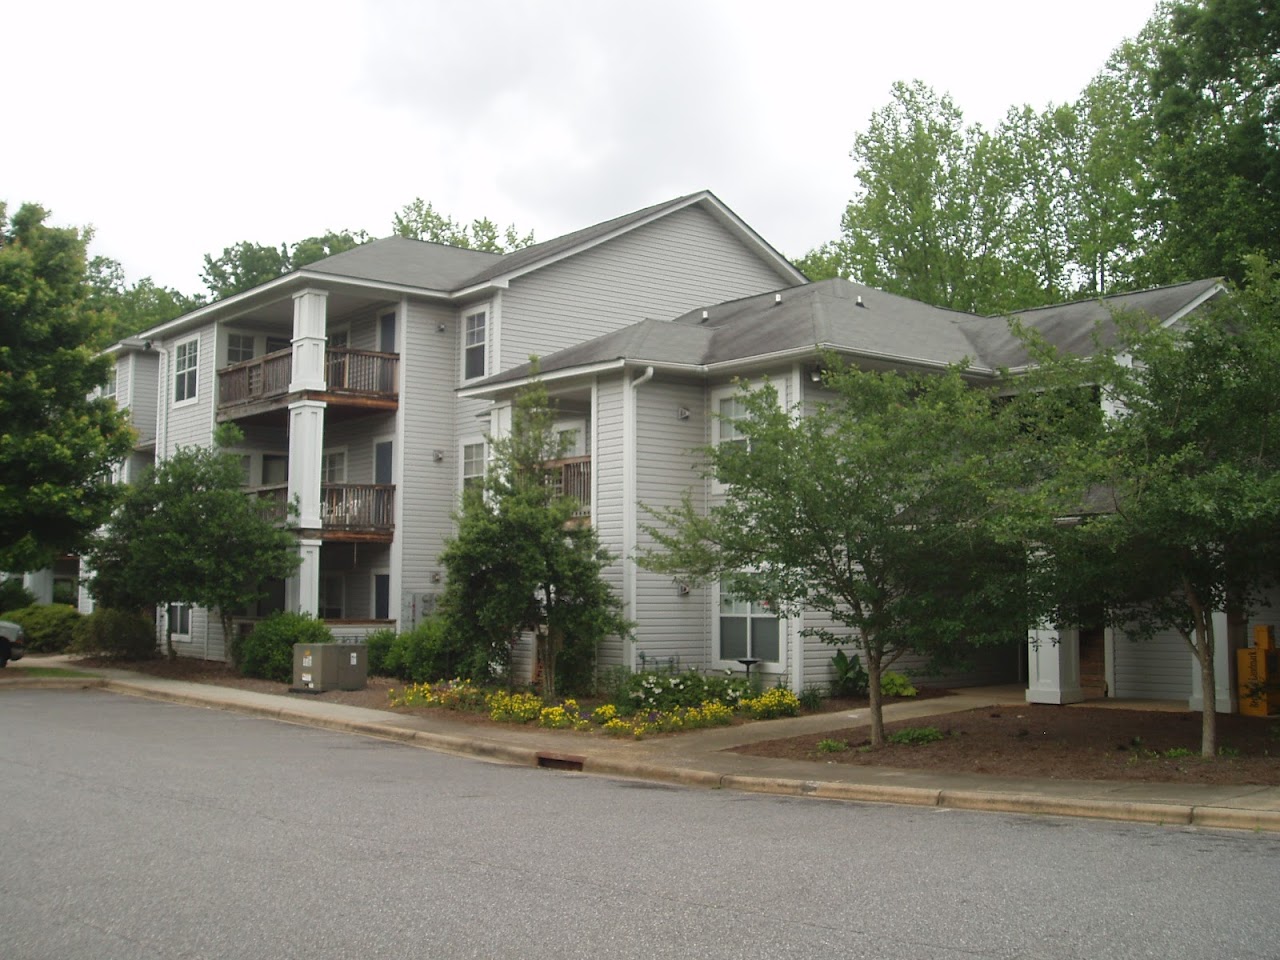 Photo of FOREST PARK GARDENS PHASE II at 1305 FOREST PARK TERRACE STATESVILLE, NC 28677